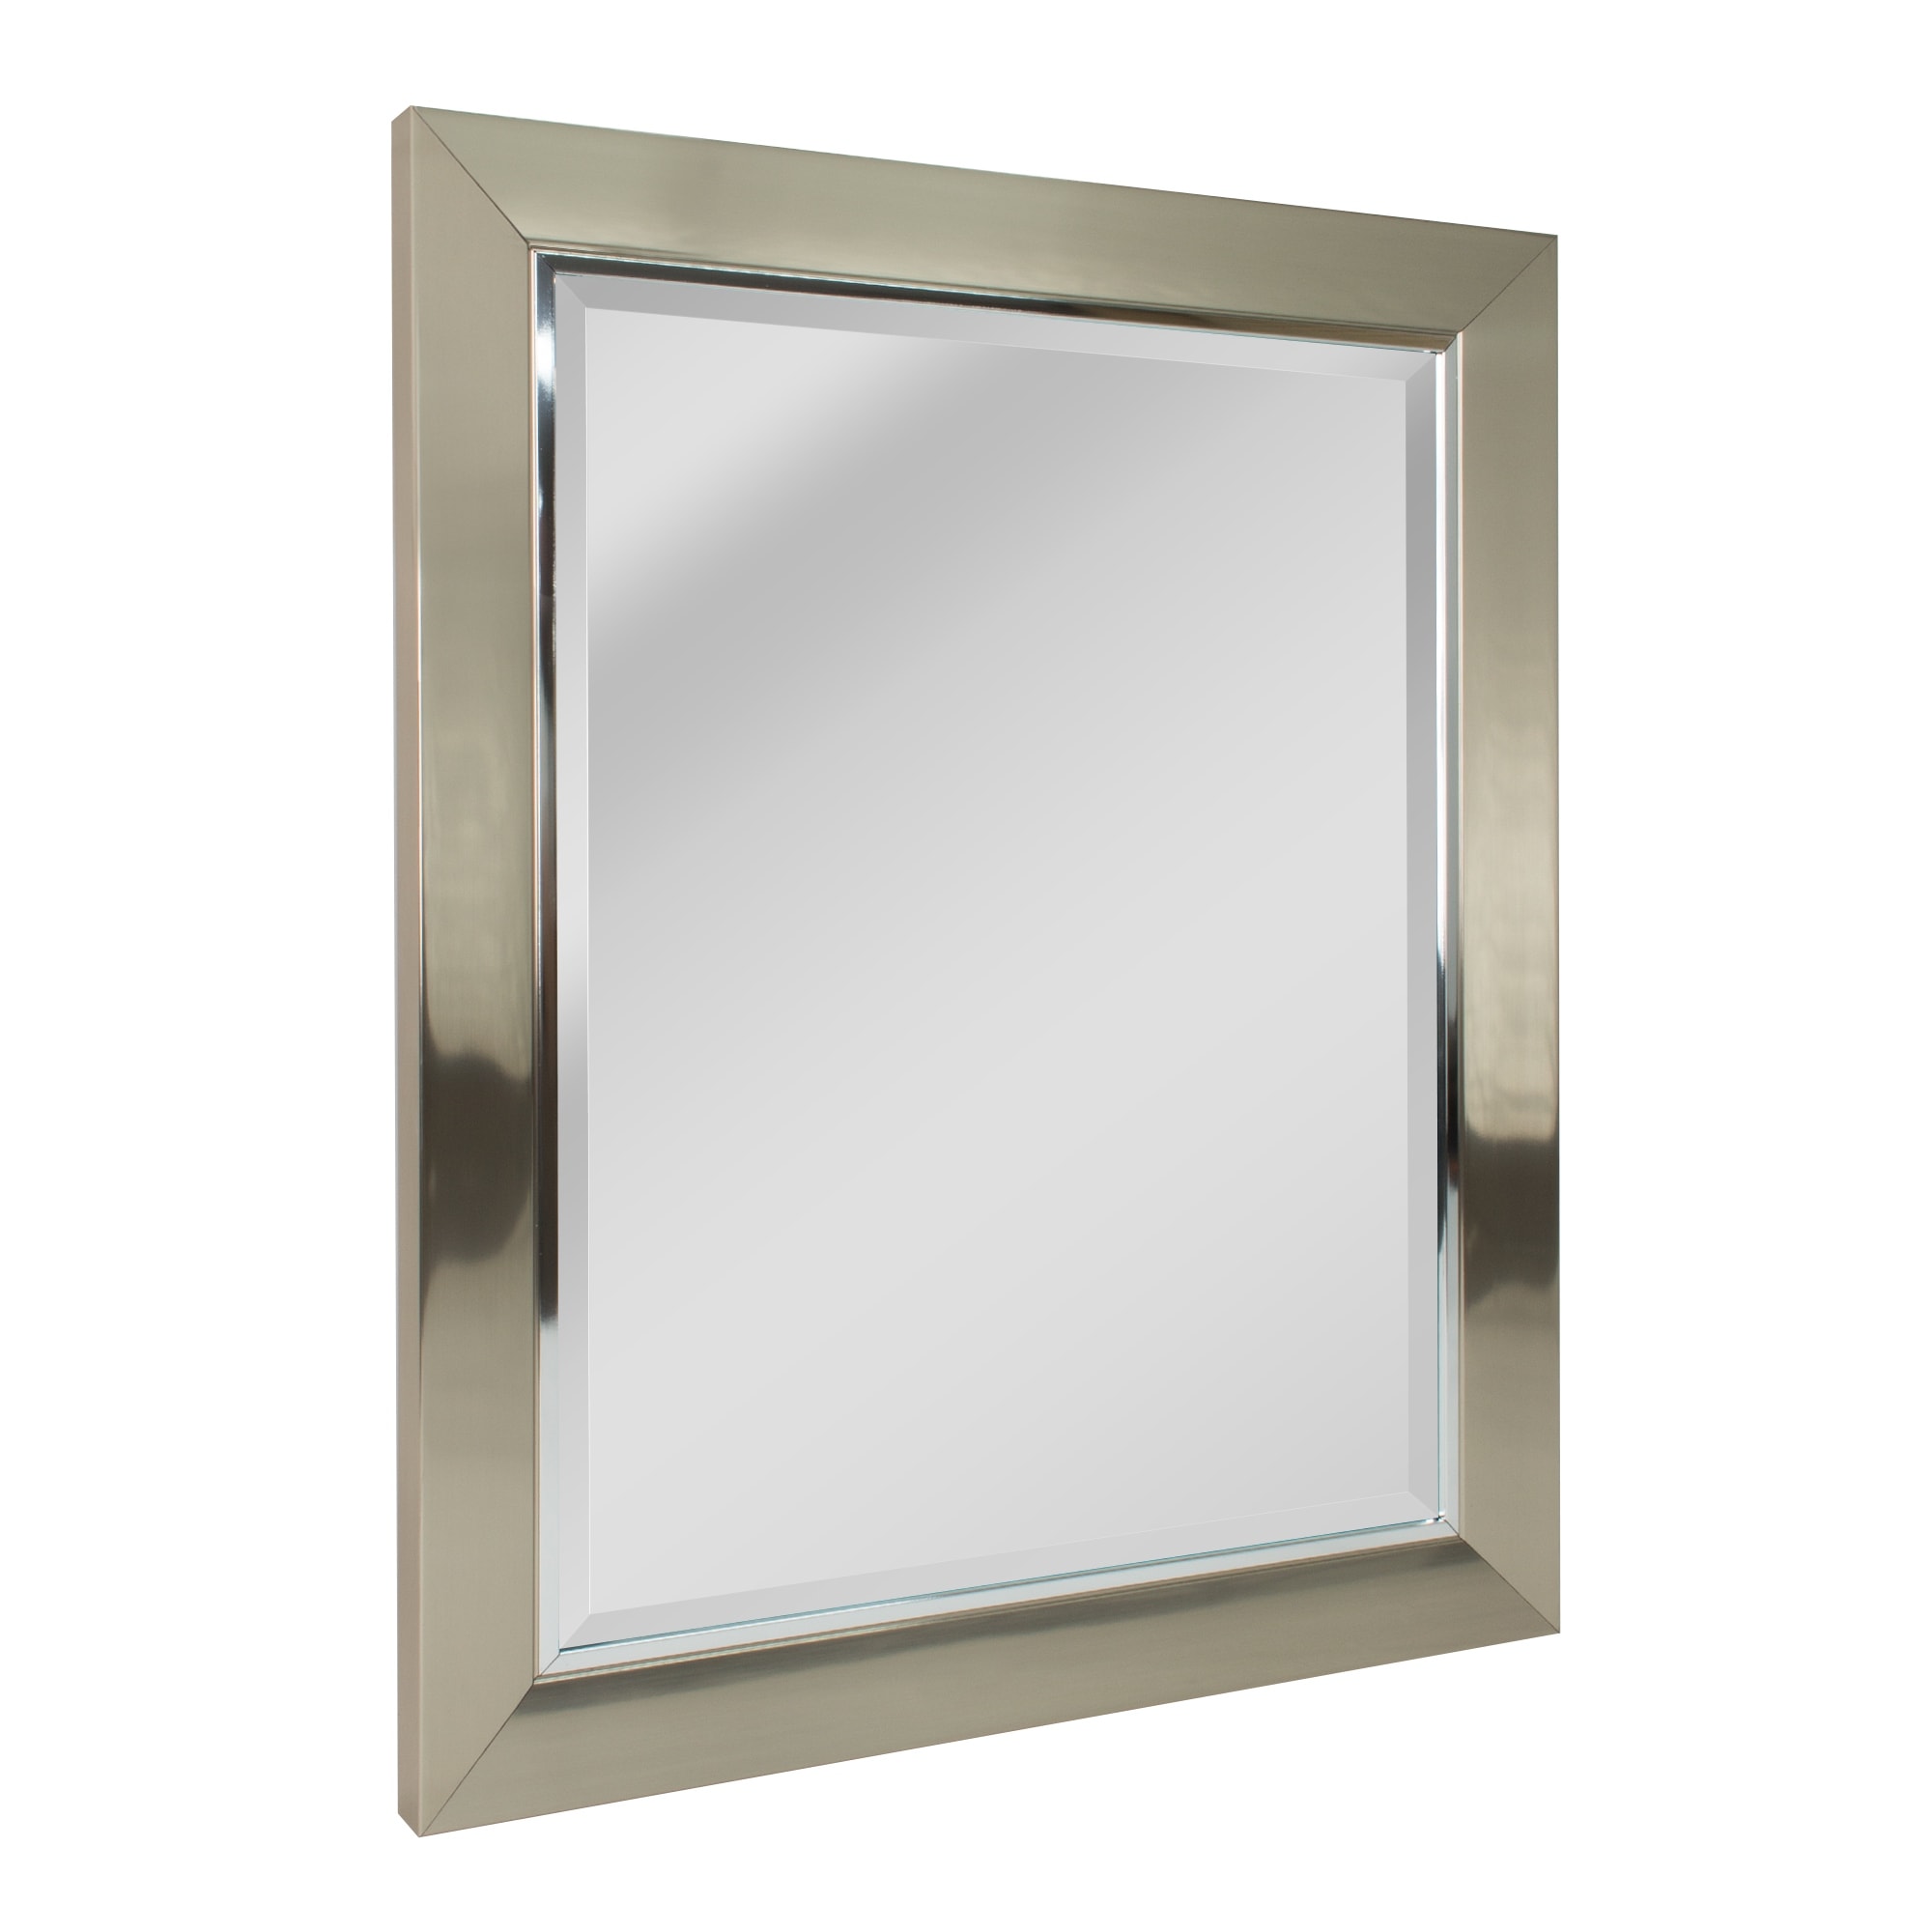 Head West Brushed Nickel and Chrome PS Beveled Mirror On Sale Bed Bath   Beyond 32656180